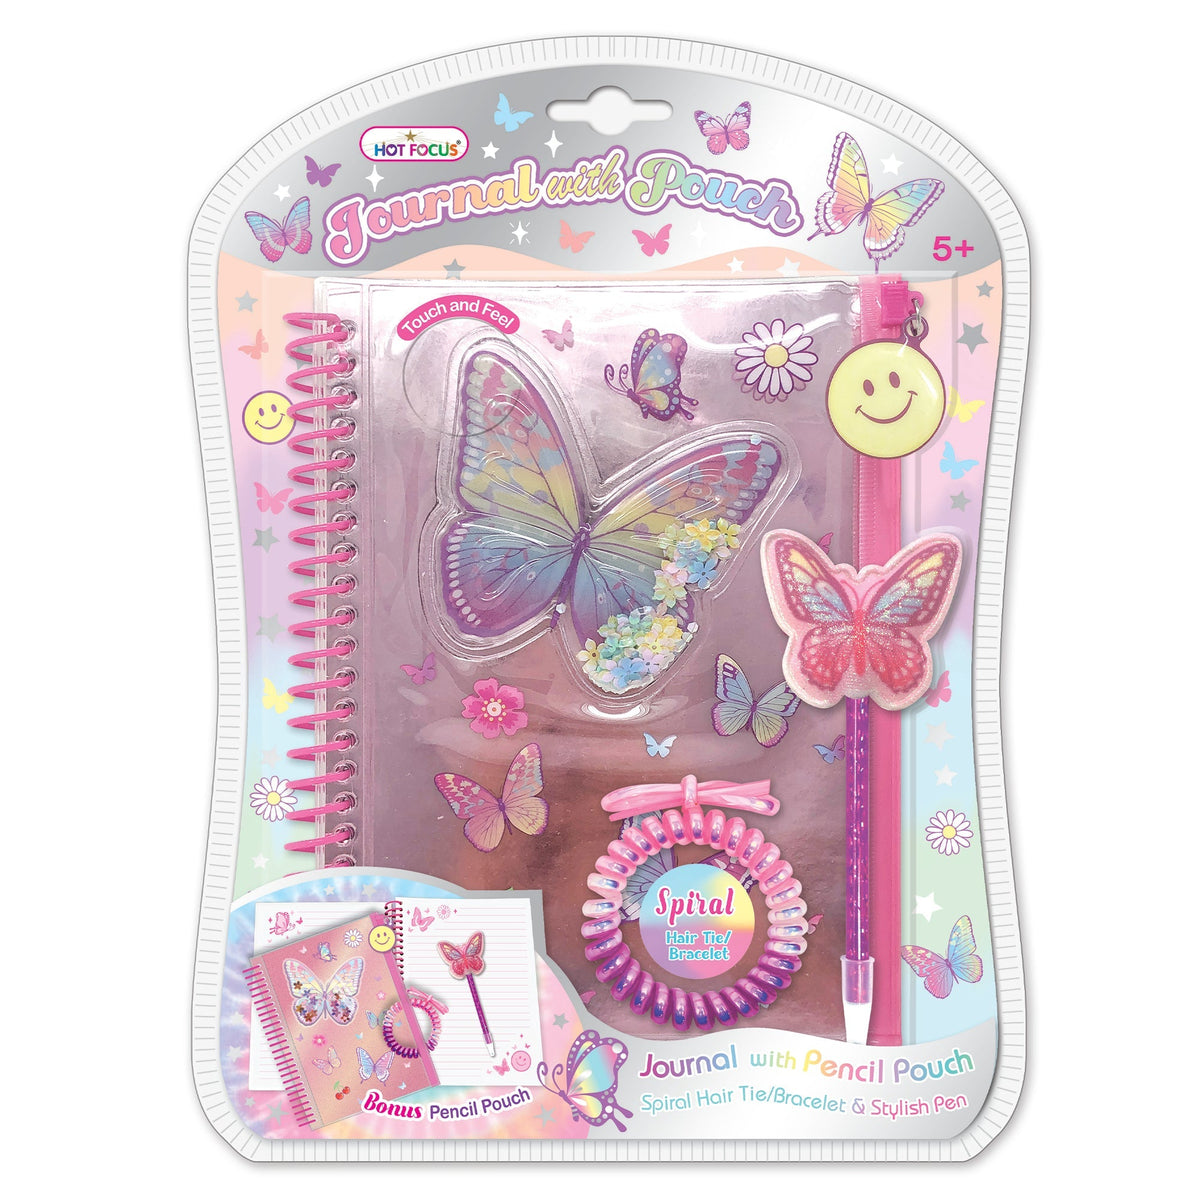 Hot Focus Toys & Games Tie Dye Butterfly Journal with Pouch, 1 Count